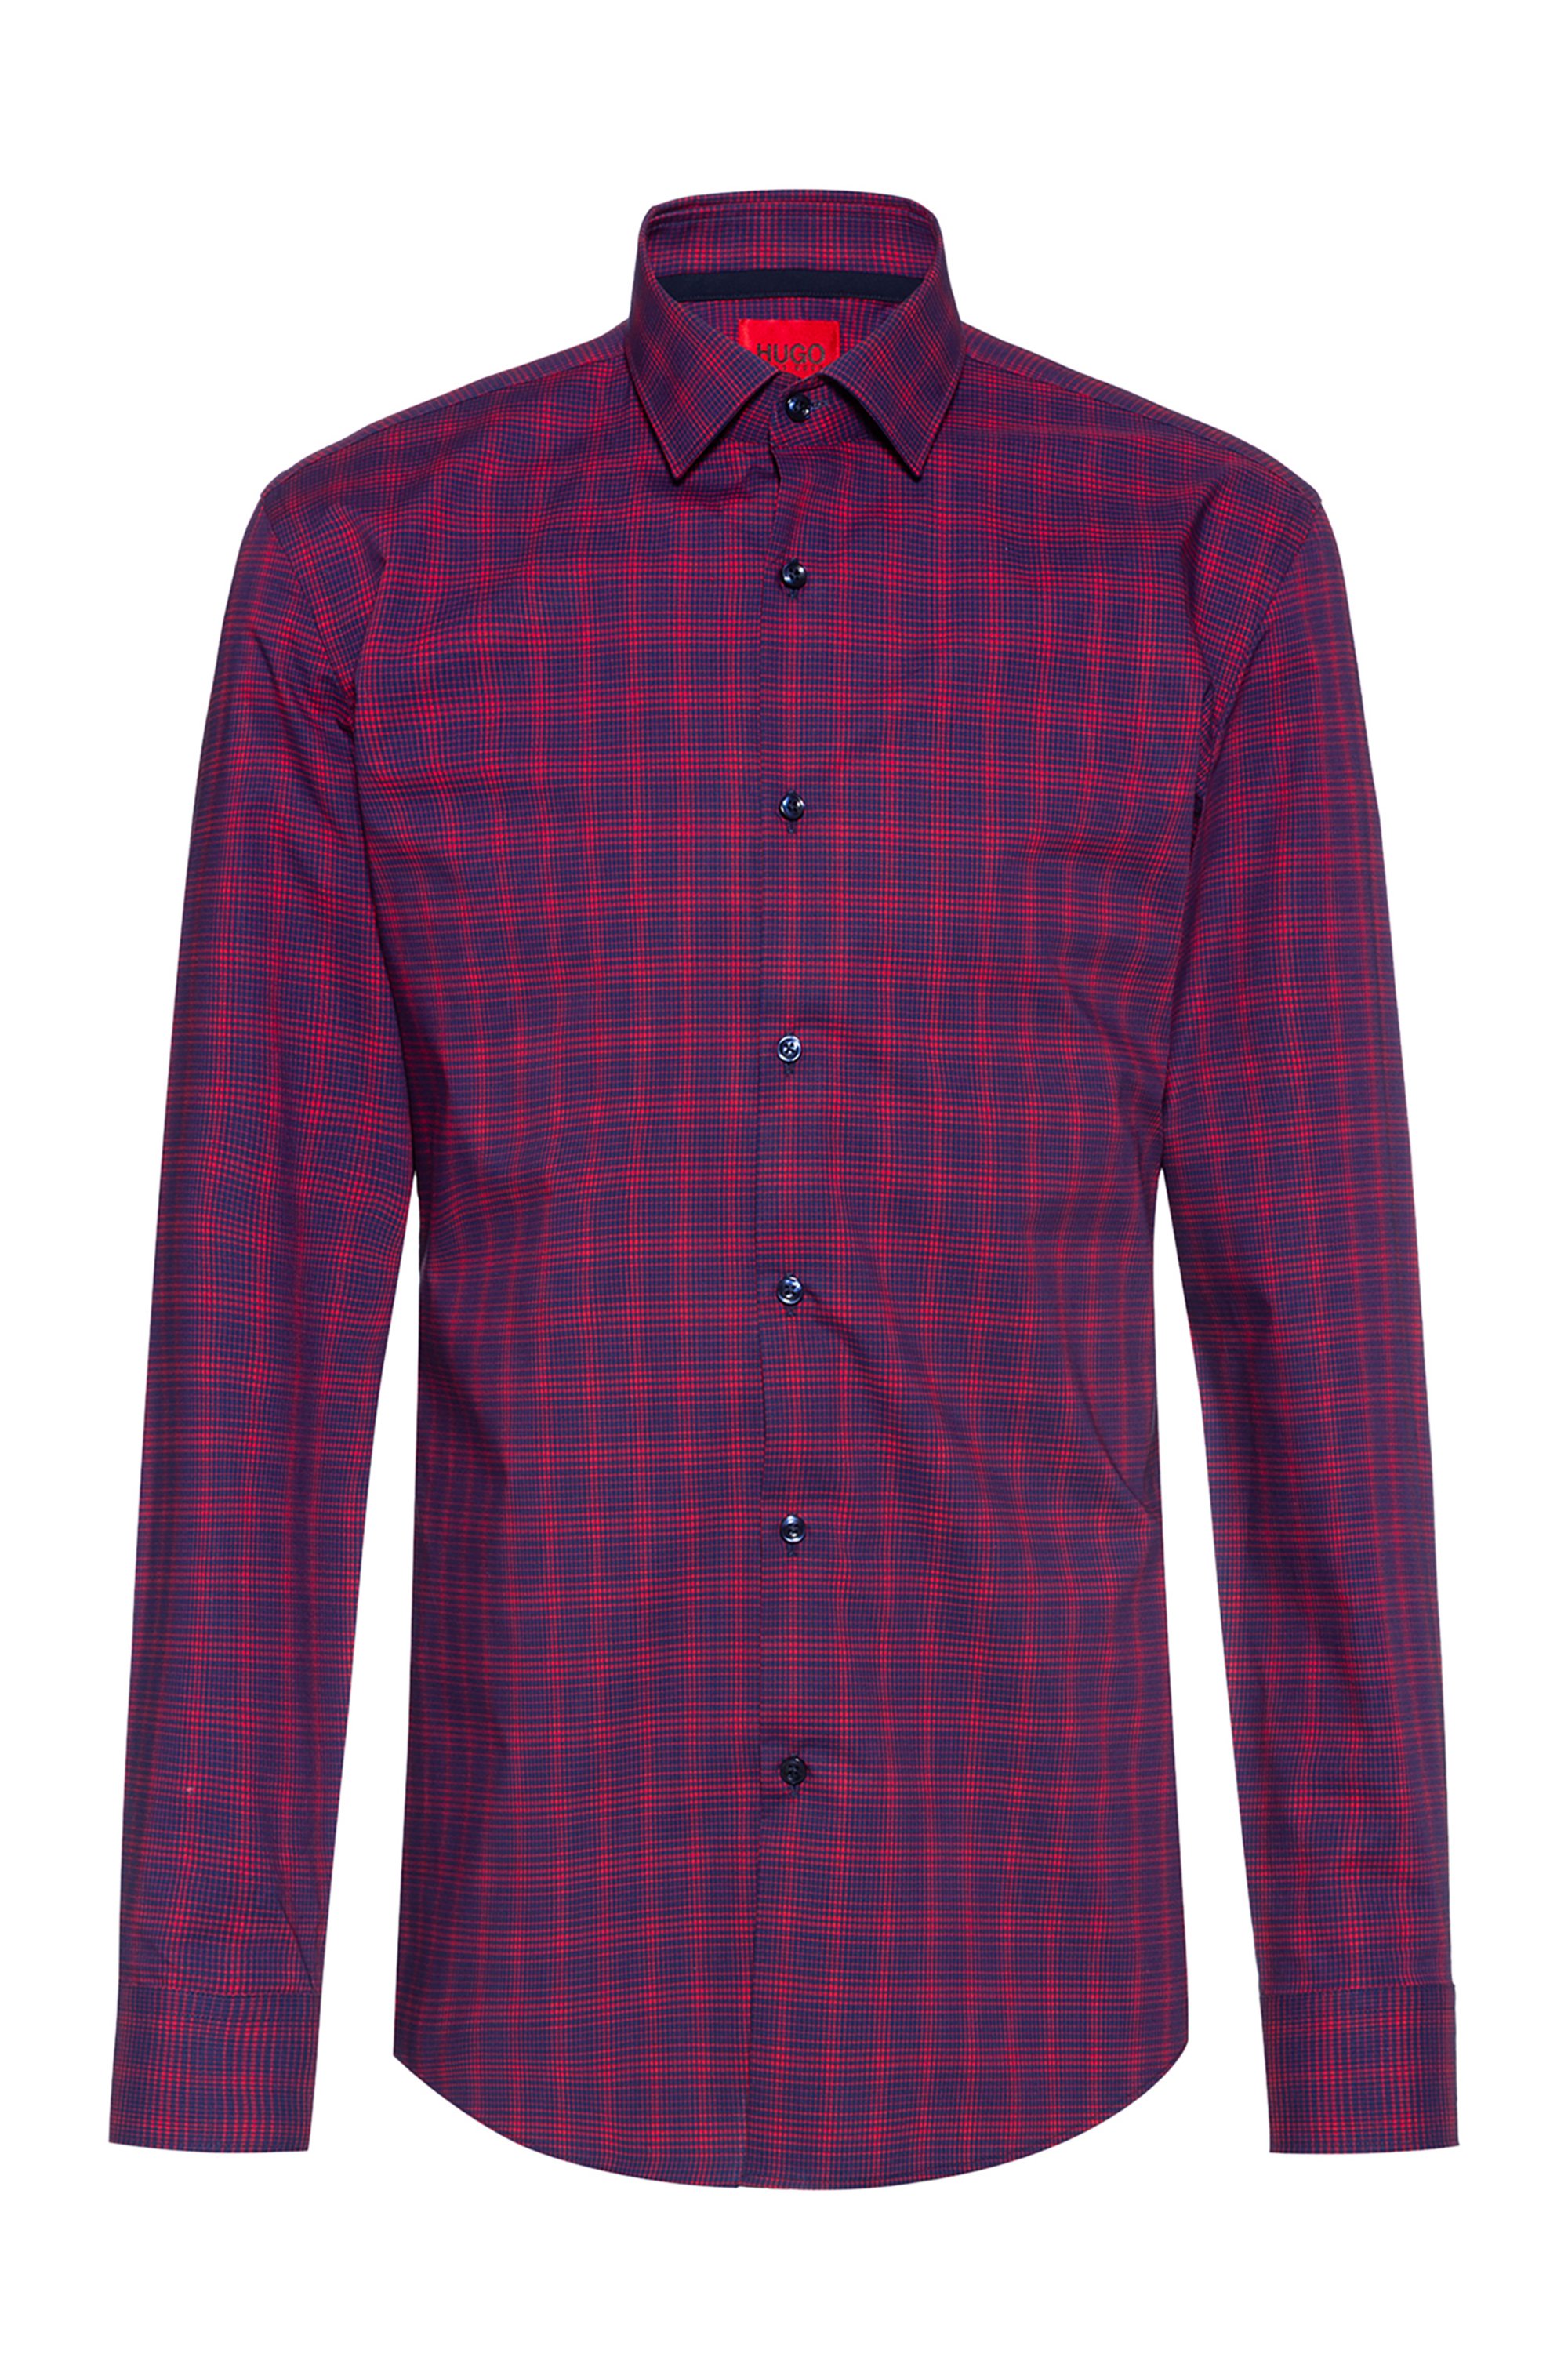 Easy-iron slim-fit shirt in checked cotton poplin, Red Patterned